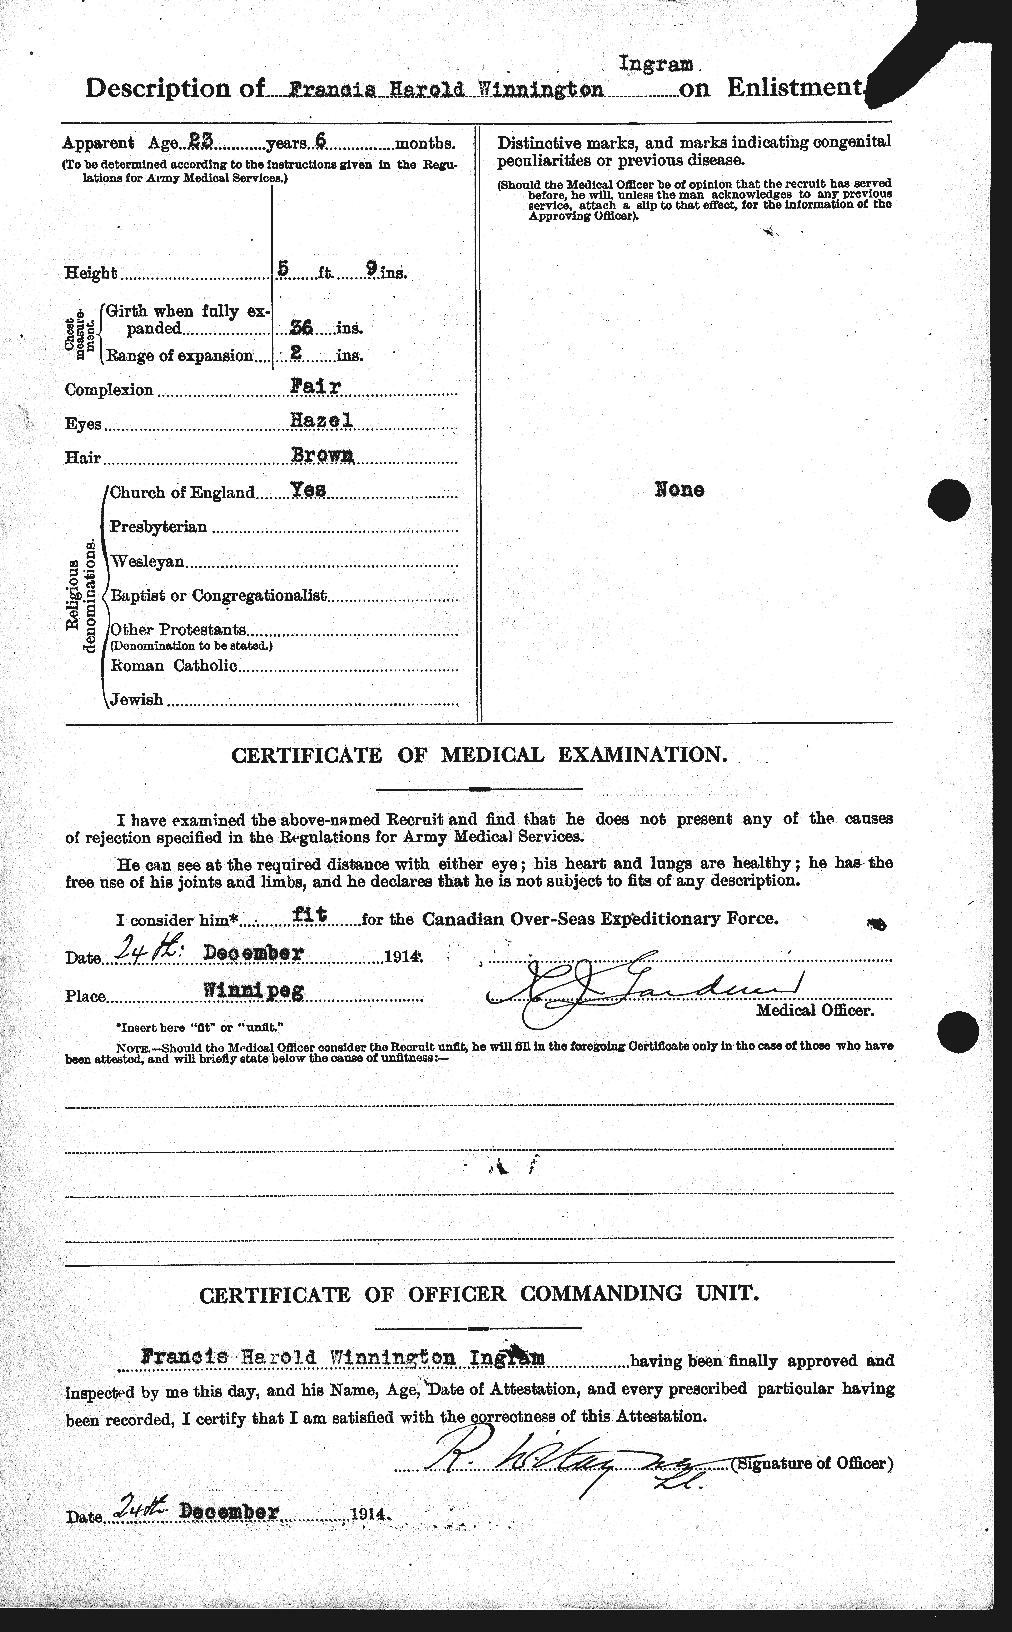 Personnel Records of the First World War - CEF 411126b